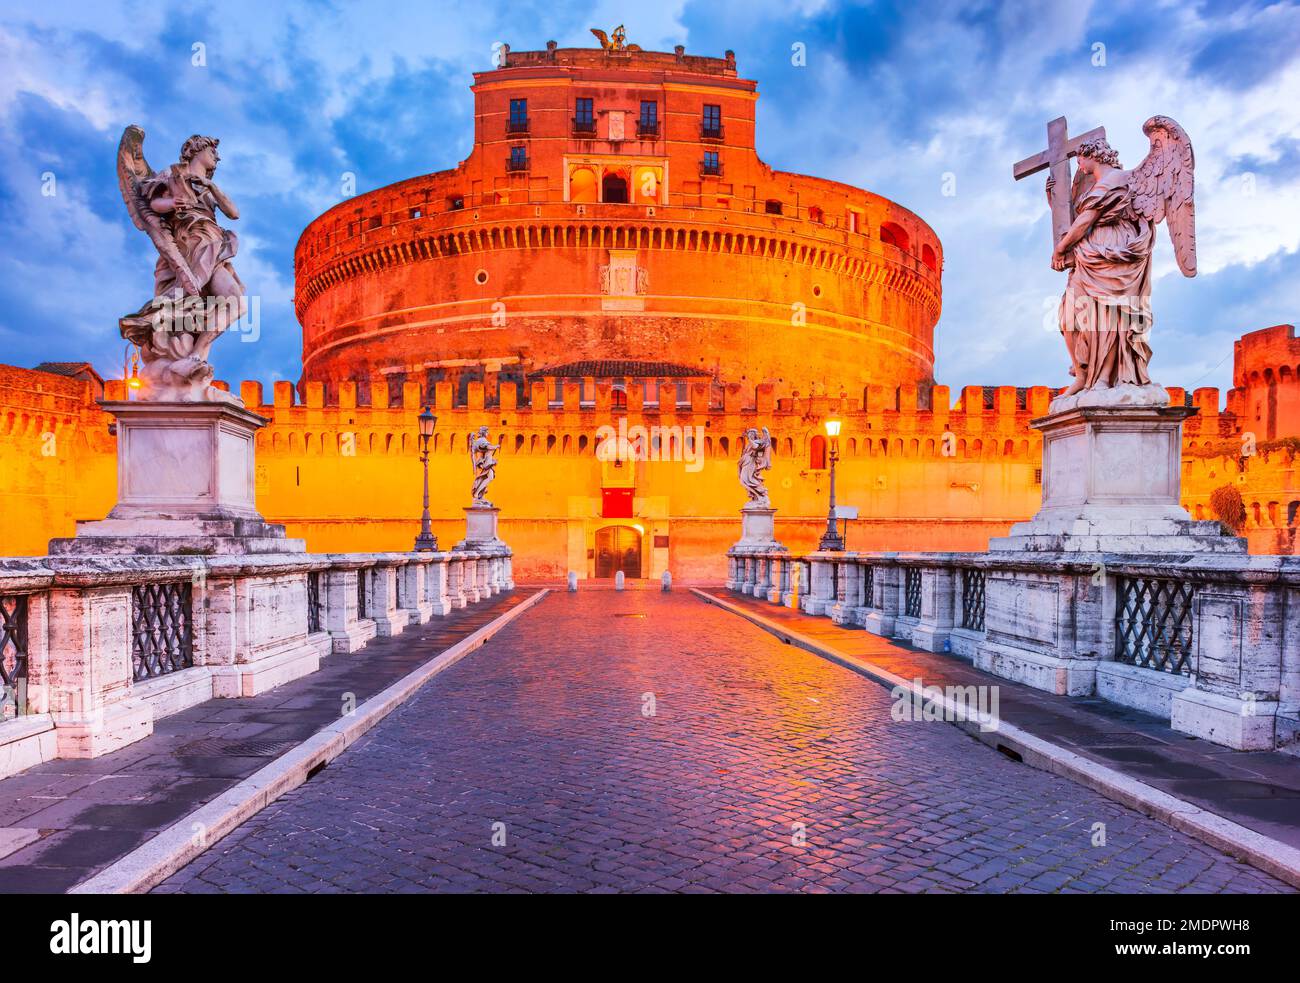 Rome, Italy. Famous ancient Castle Sant Angelo, Roman Empire heritage historical site, built by Hadrian Emperor. Stock Photo